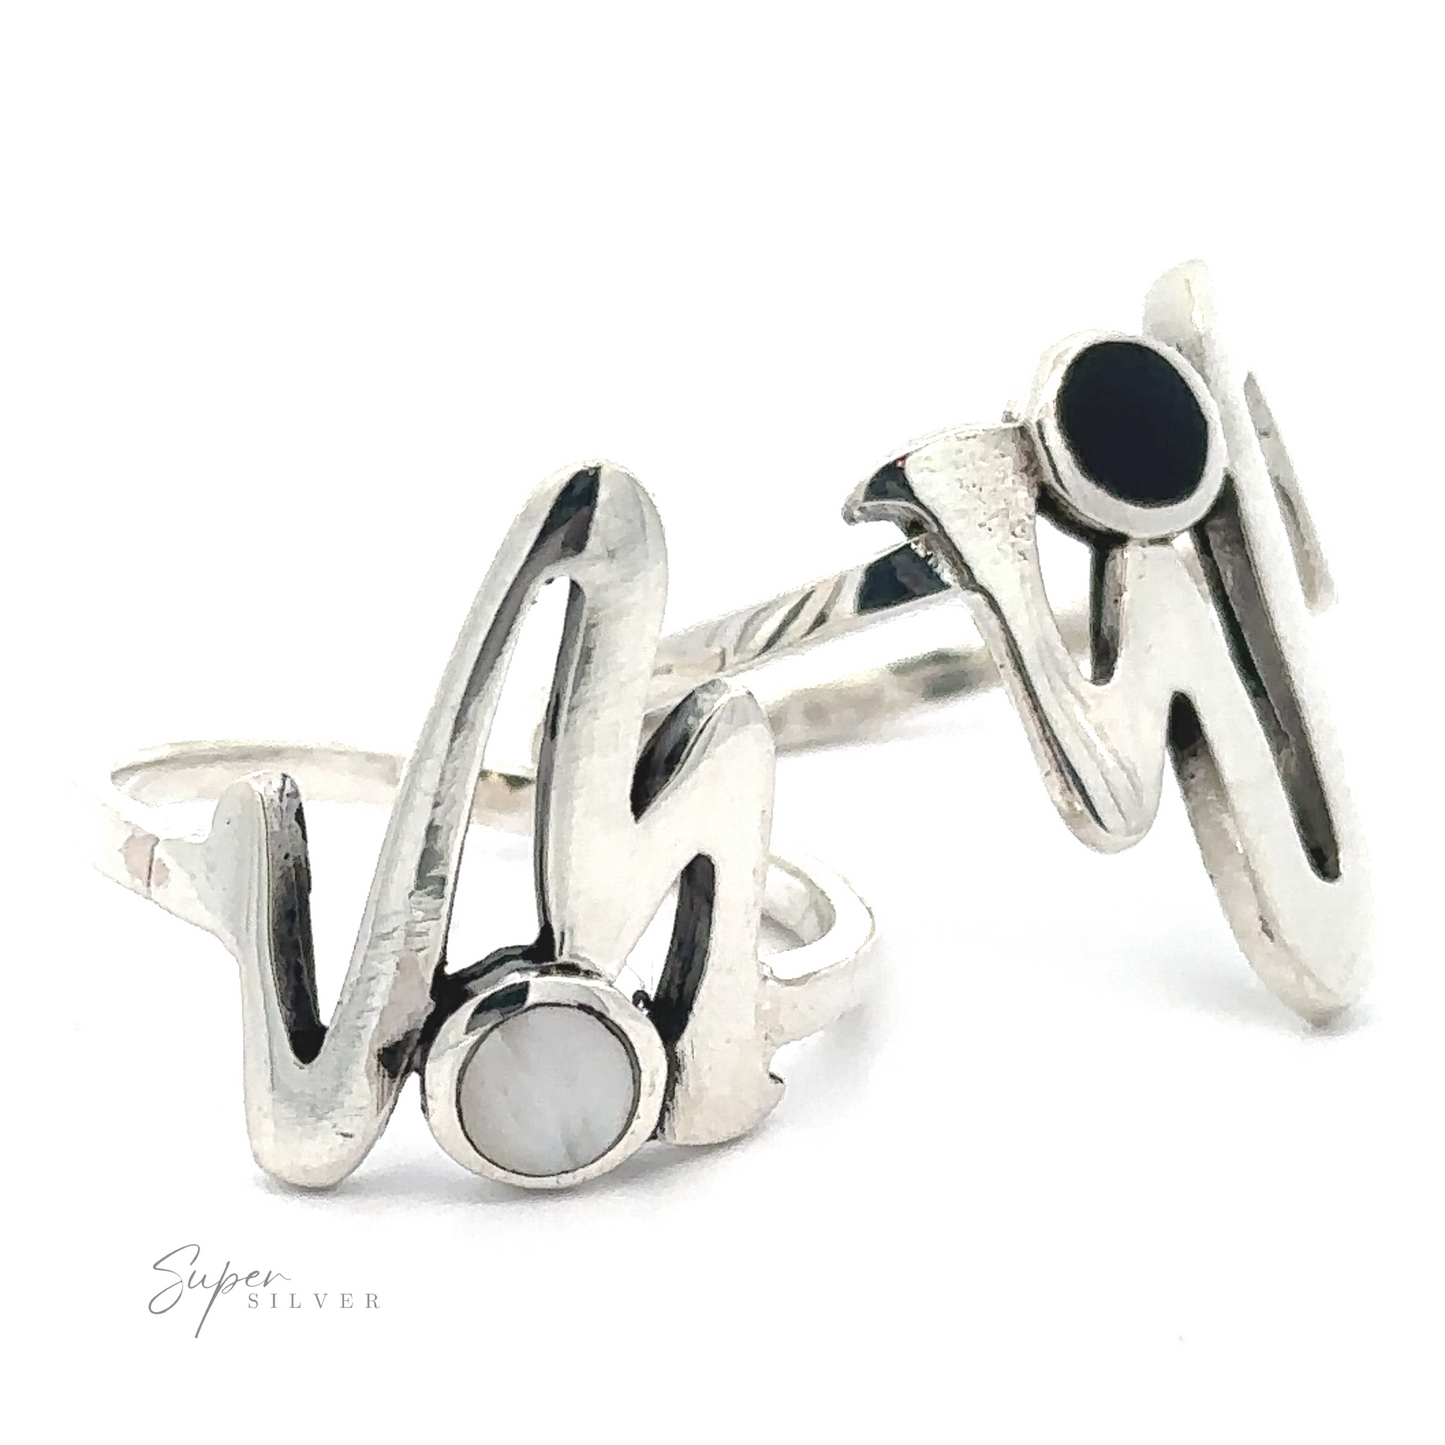 A pair of Stone Inlay Zig Zag rings with a stylized "w" design, featuring onyx circular insets, against a white background.